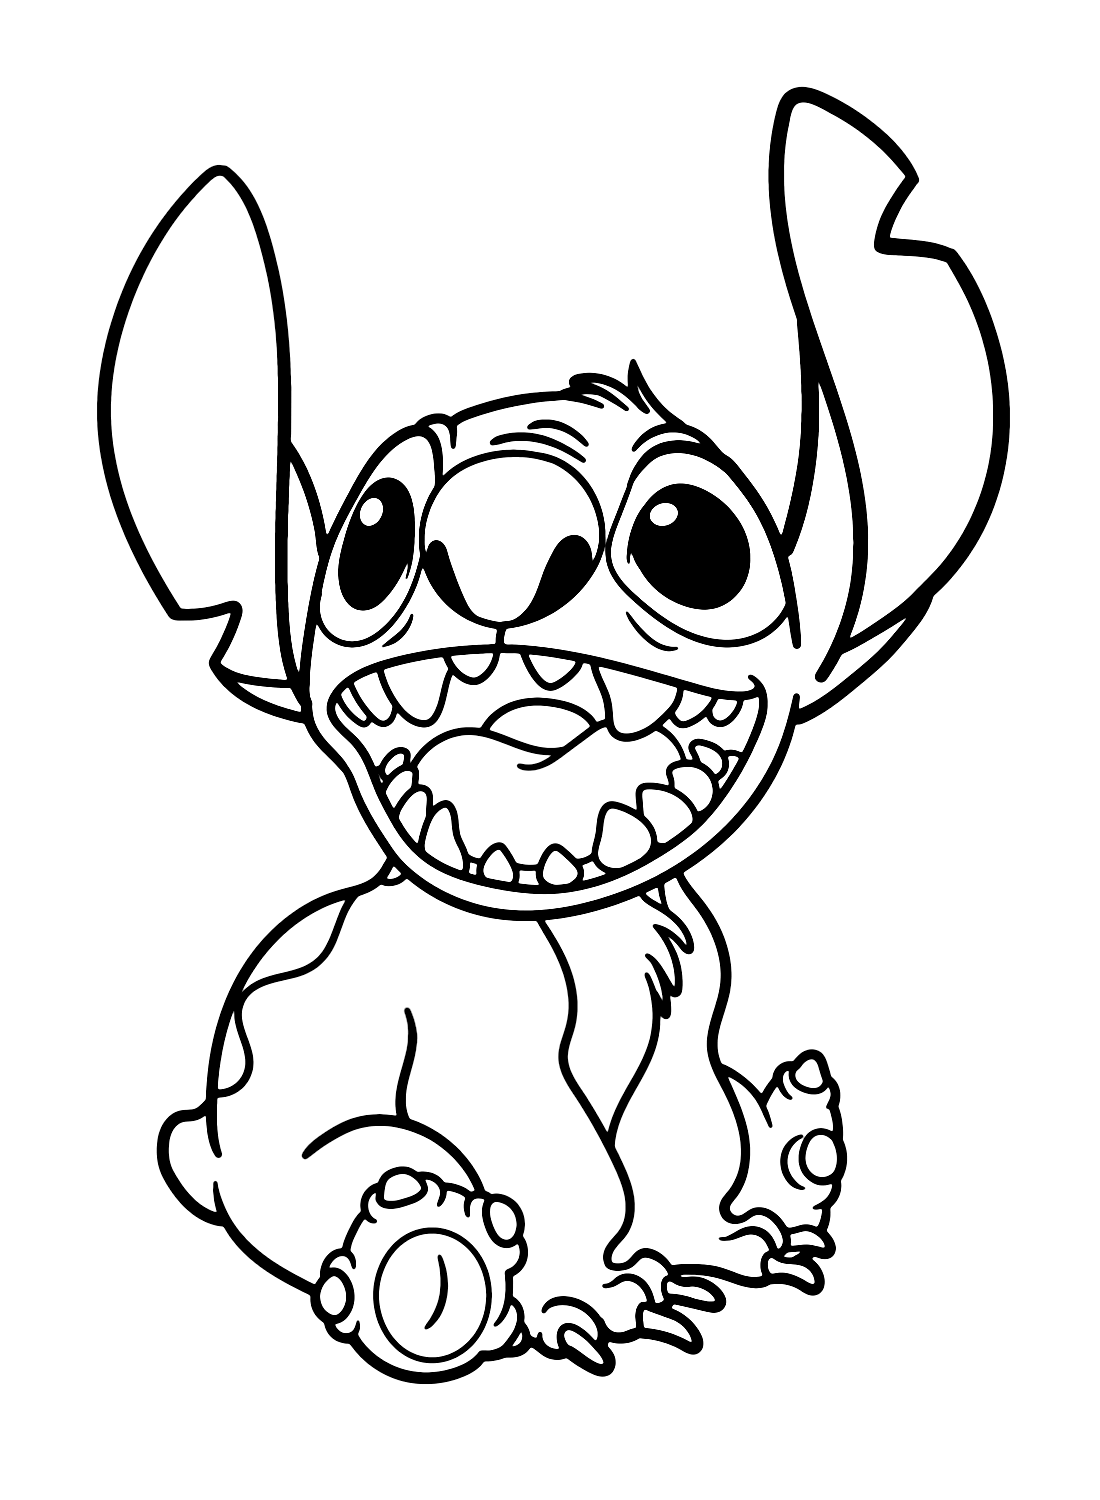 Stitch coloring page Coloring Page